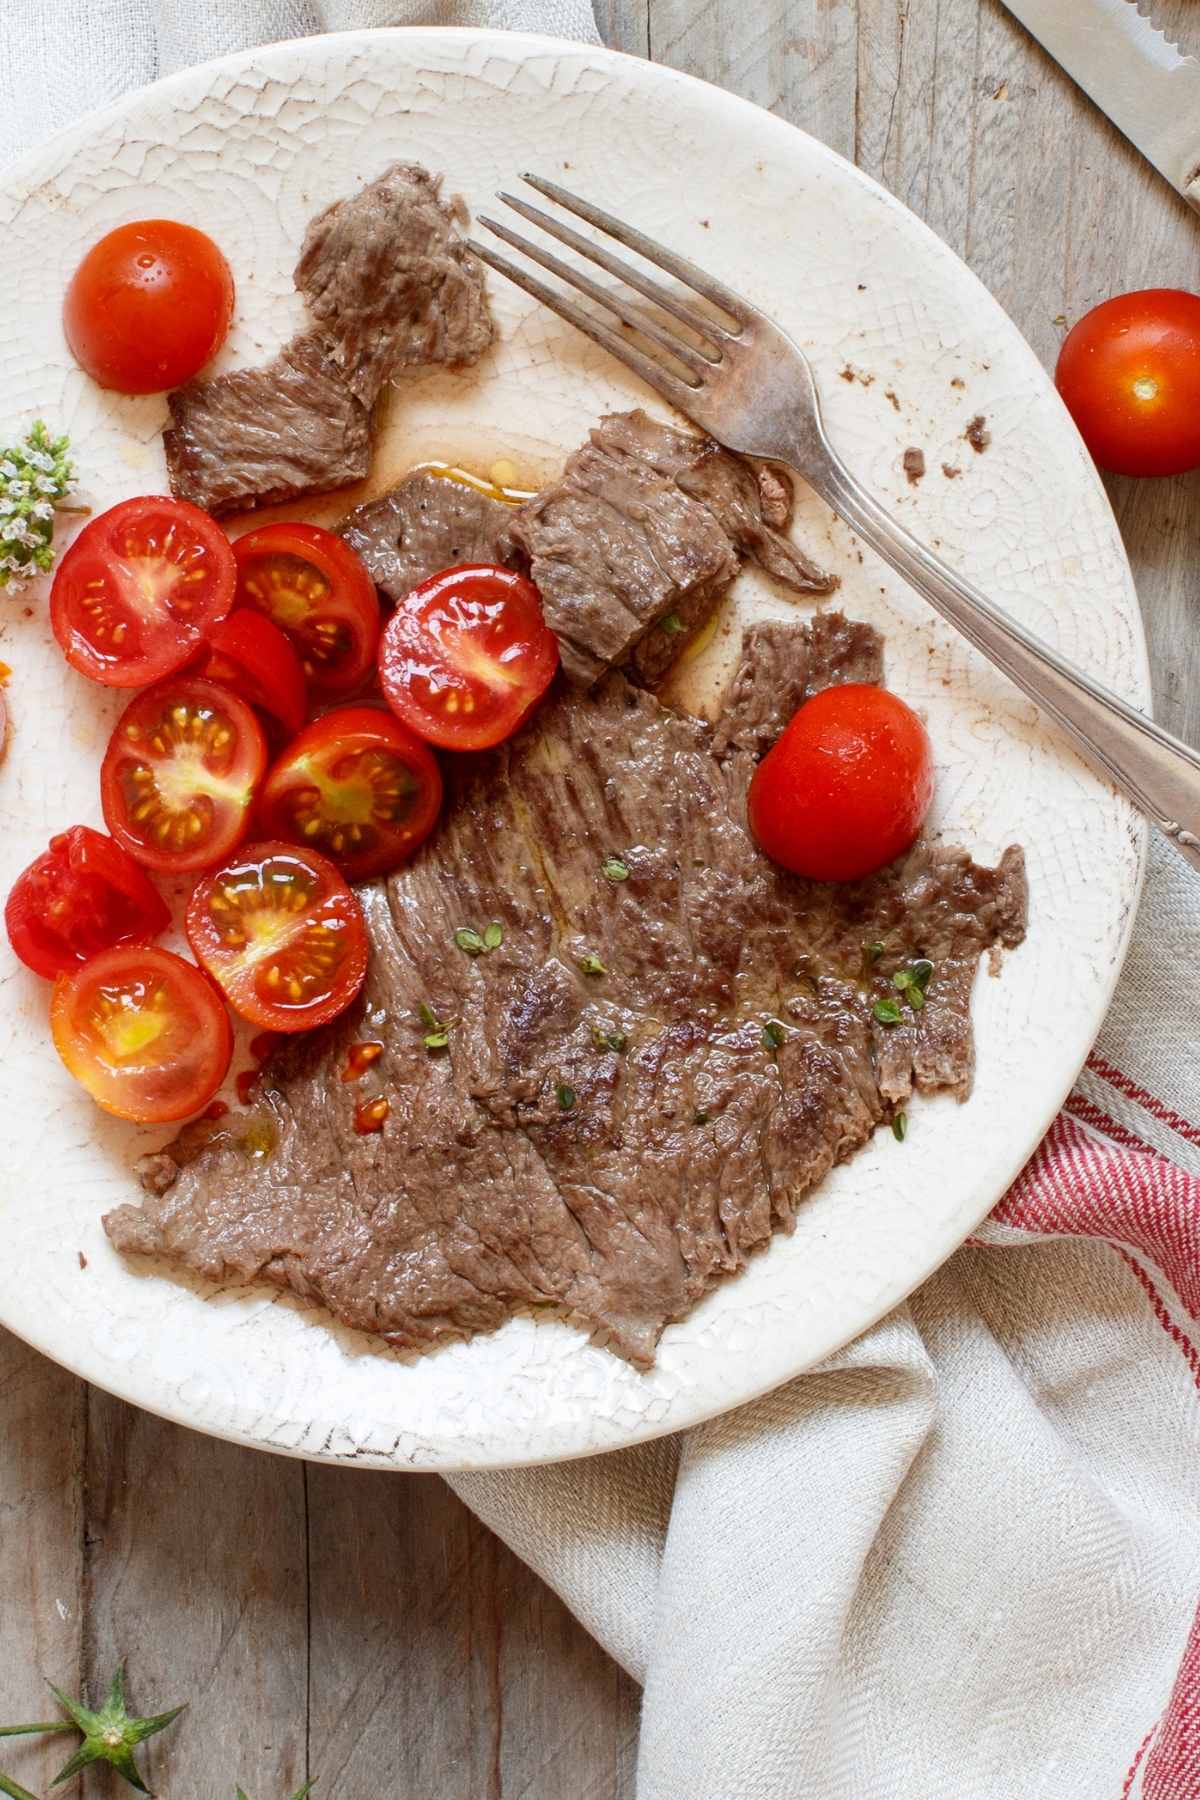 Sizzle steaks are thinly sliced cuts or shaved slices of beef that are flavorful and quick to cook, making them our go-to meal for a simple weeknight dinner. Serve fresh from the pan with a quick side salad or fluffy mashed potatoes for a complete meal in under 20 minutes!